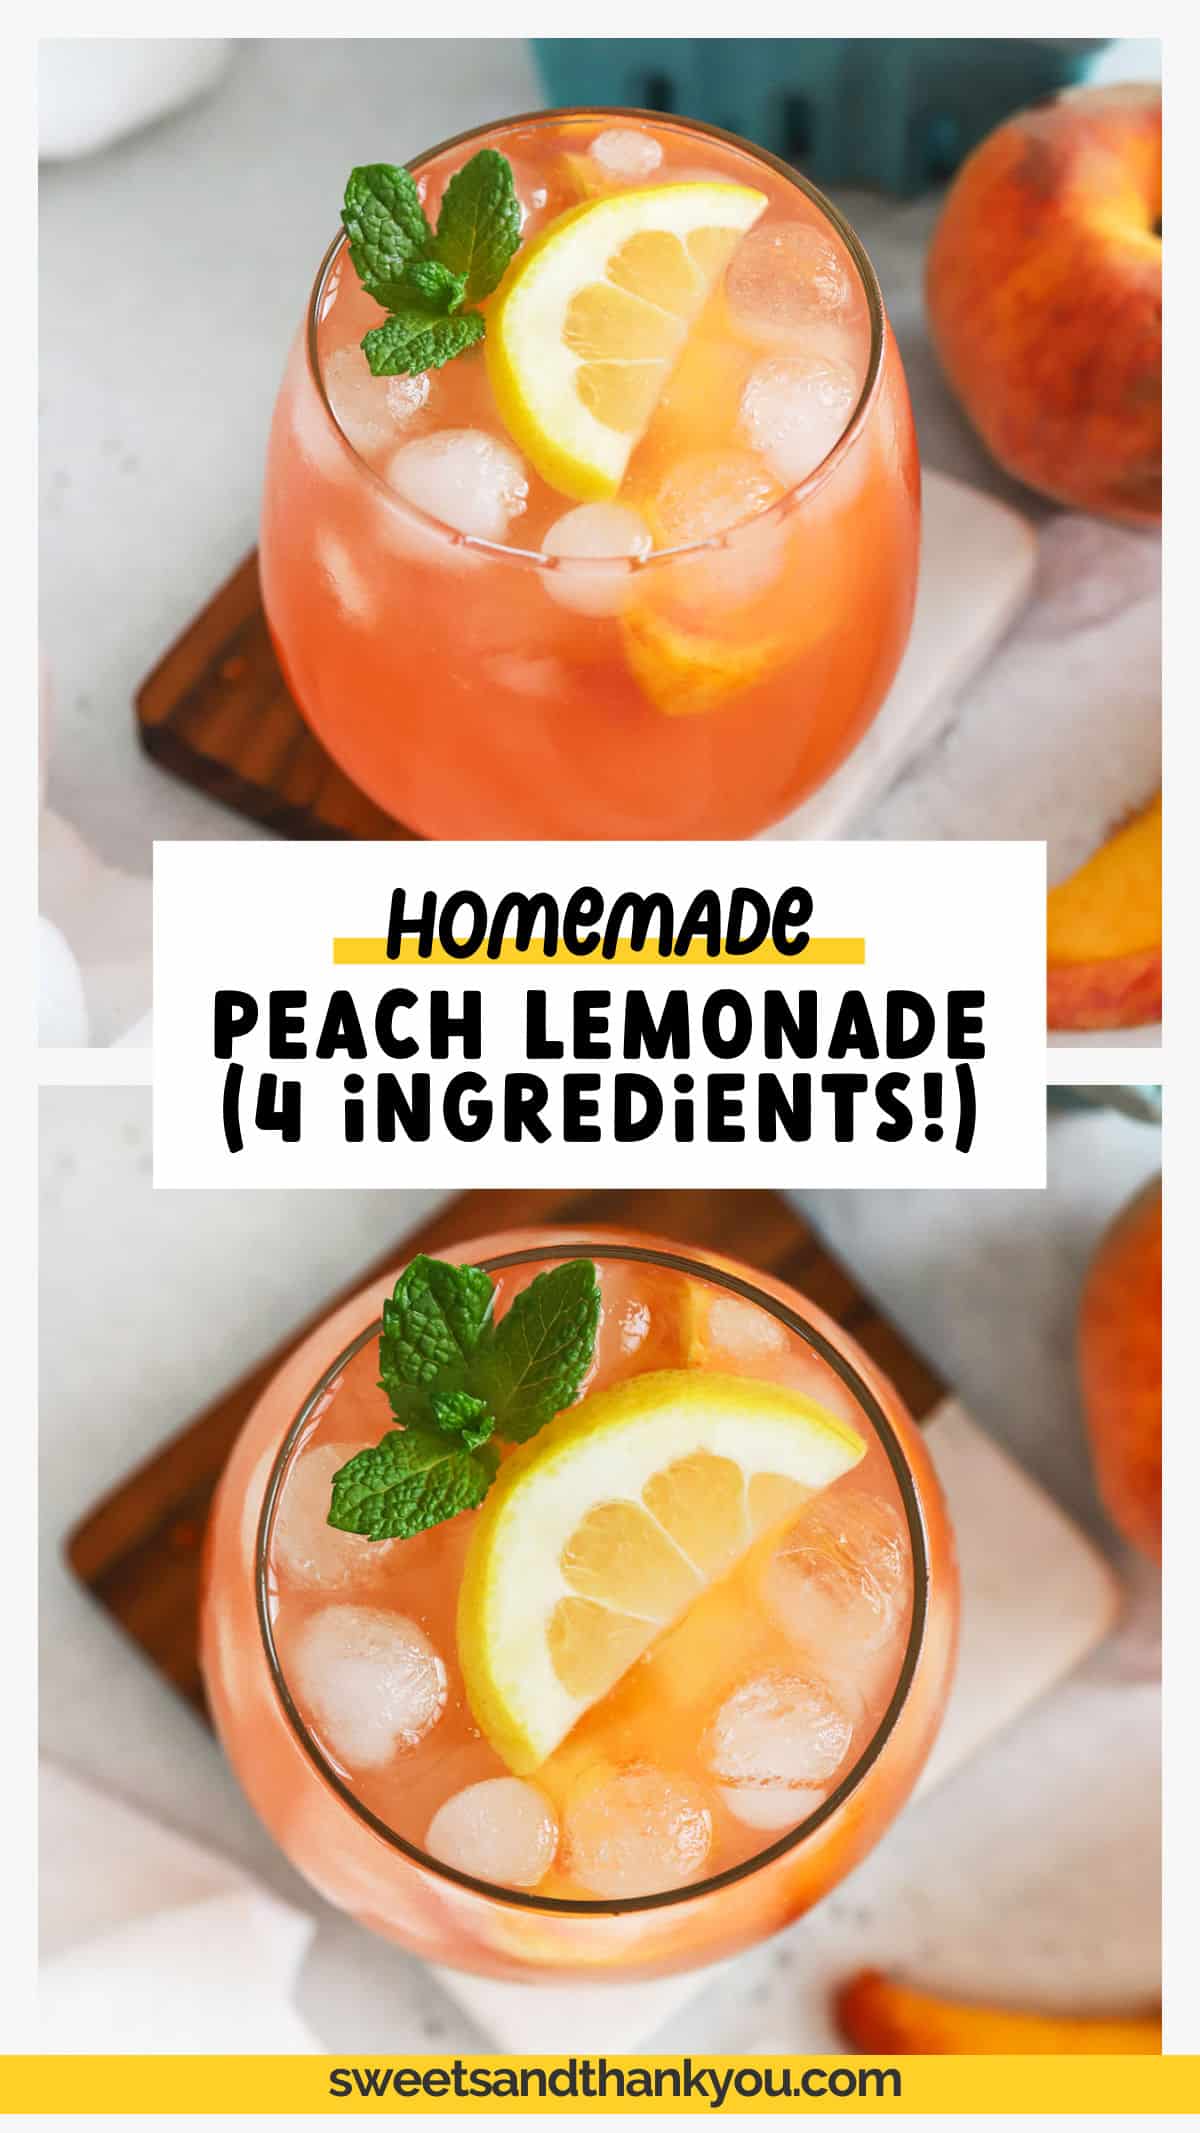 This easy homemade peach lemonade recipe is made with fresh (or frozen!) peaches and lemon juice to make a light, refreshing summer drink recipe you won't want to miss. Once you've tried peach lemonade from scratch you won't want to go back! Get this homemade lemonade recipe and more variations to try at sweetsandthankyou.com